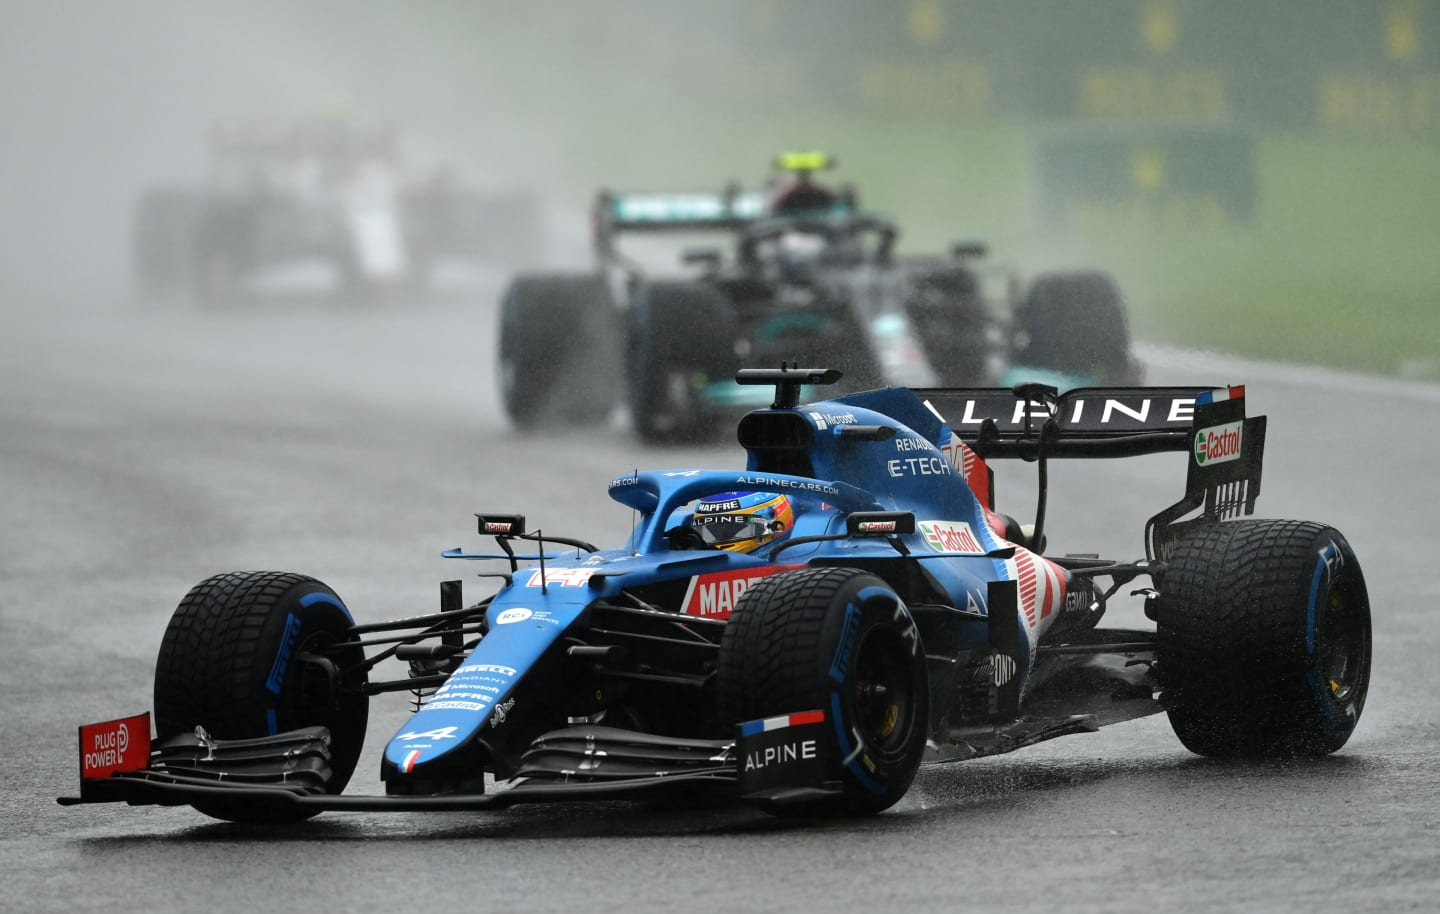 SPA, BELGIUM - AUGUST 29: Fernando Alonso of Spain driving the (14) Alpine A521 Renault during the F1 Grand Prix of Belgium at Circuit de Spa-Francorchamps on August 29, 2021 in Spa, Belgium. (Photo by Dan Mullan/Getty Images)